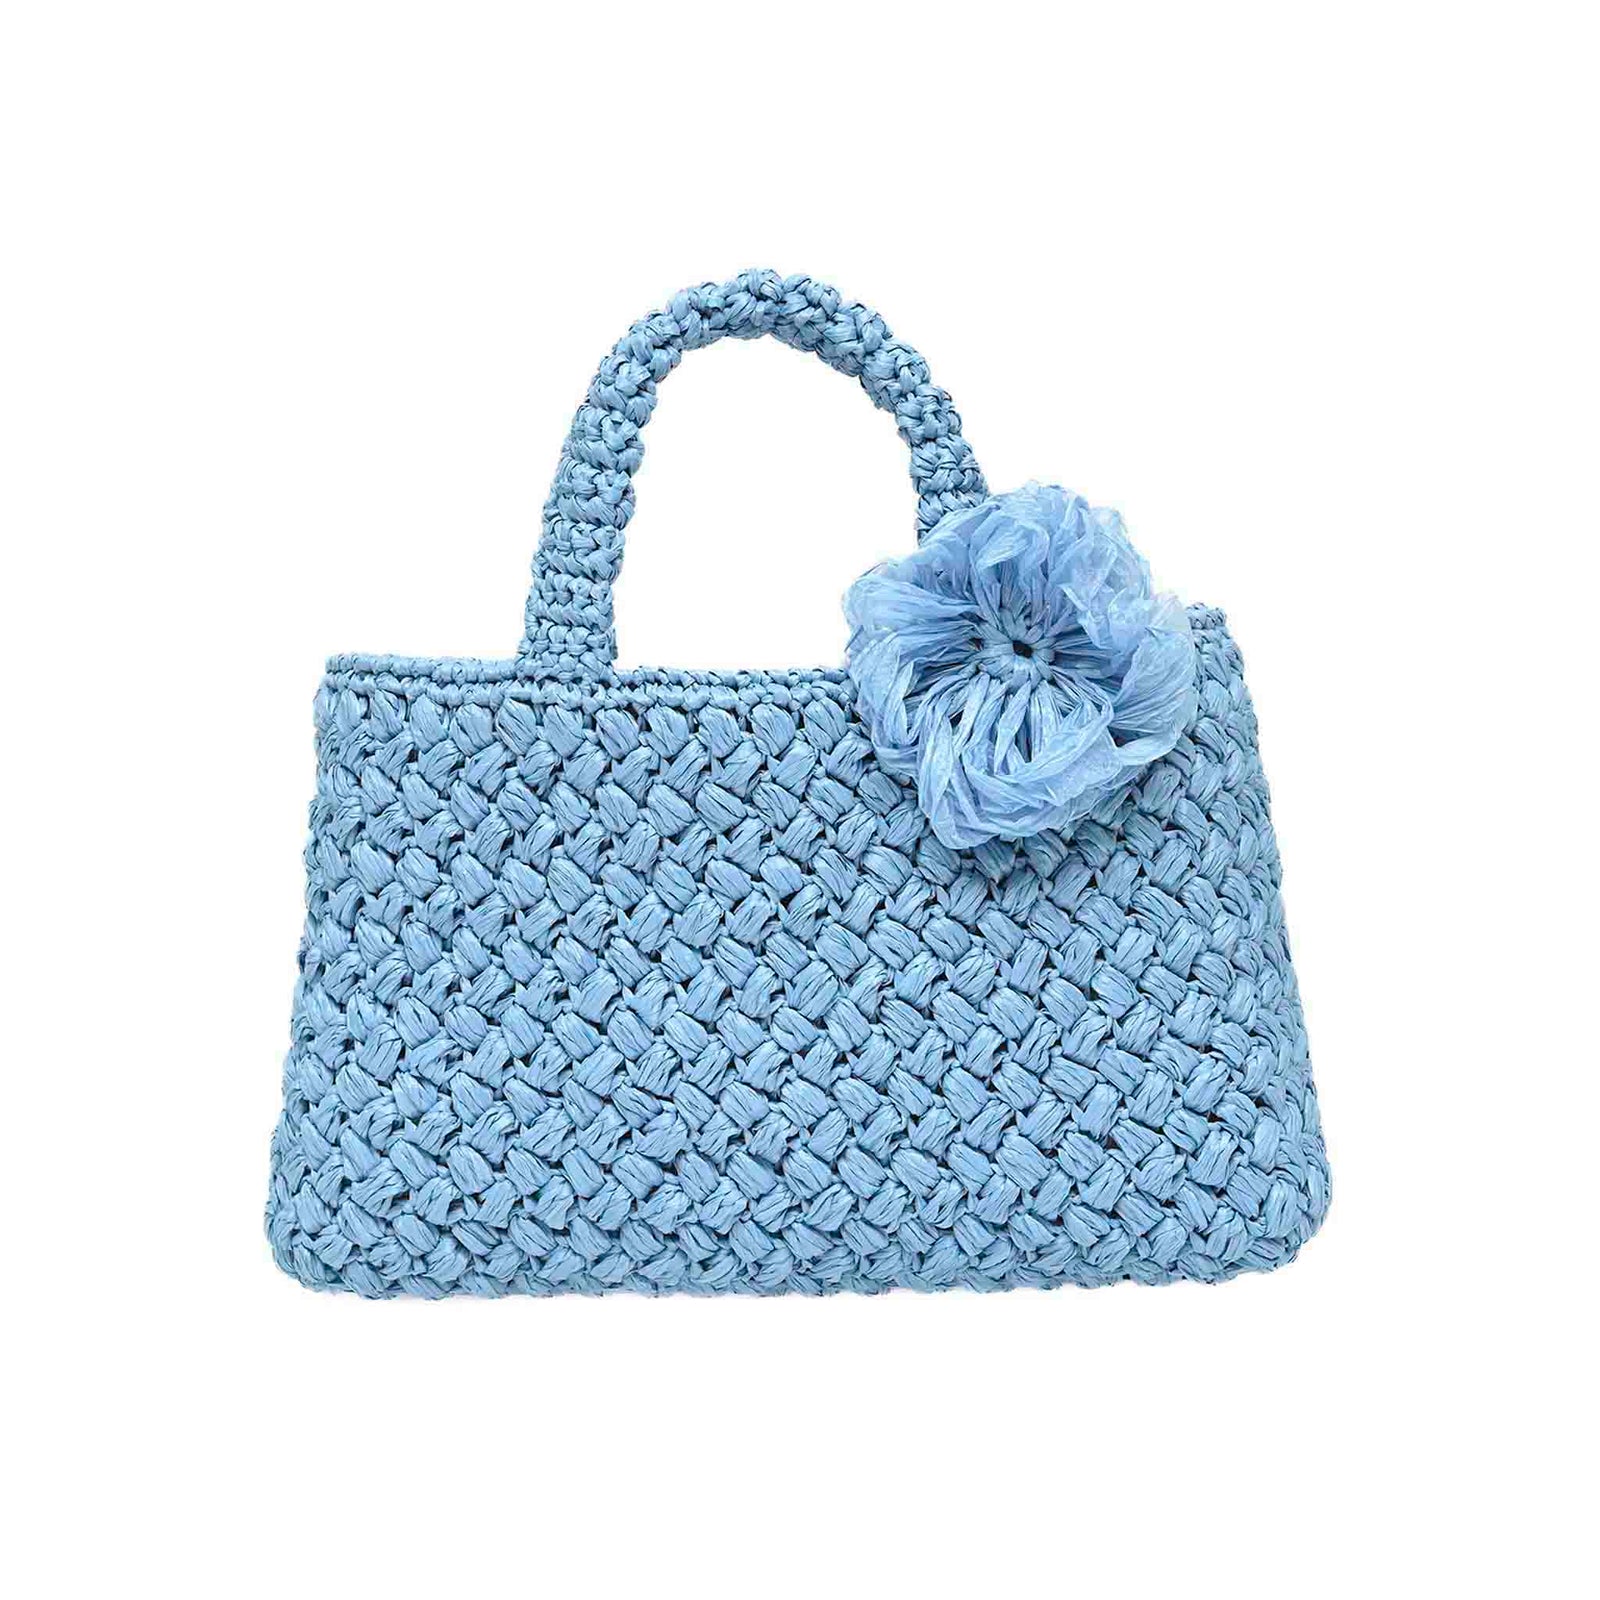 Baby Blue Hand-woven Positano Raffia Small Bag, this raffia small bag brings a touch of coastal elegance to your beach look and is a shopping lover's dream from Carmen Sol.